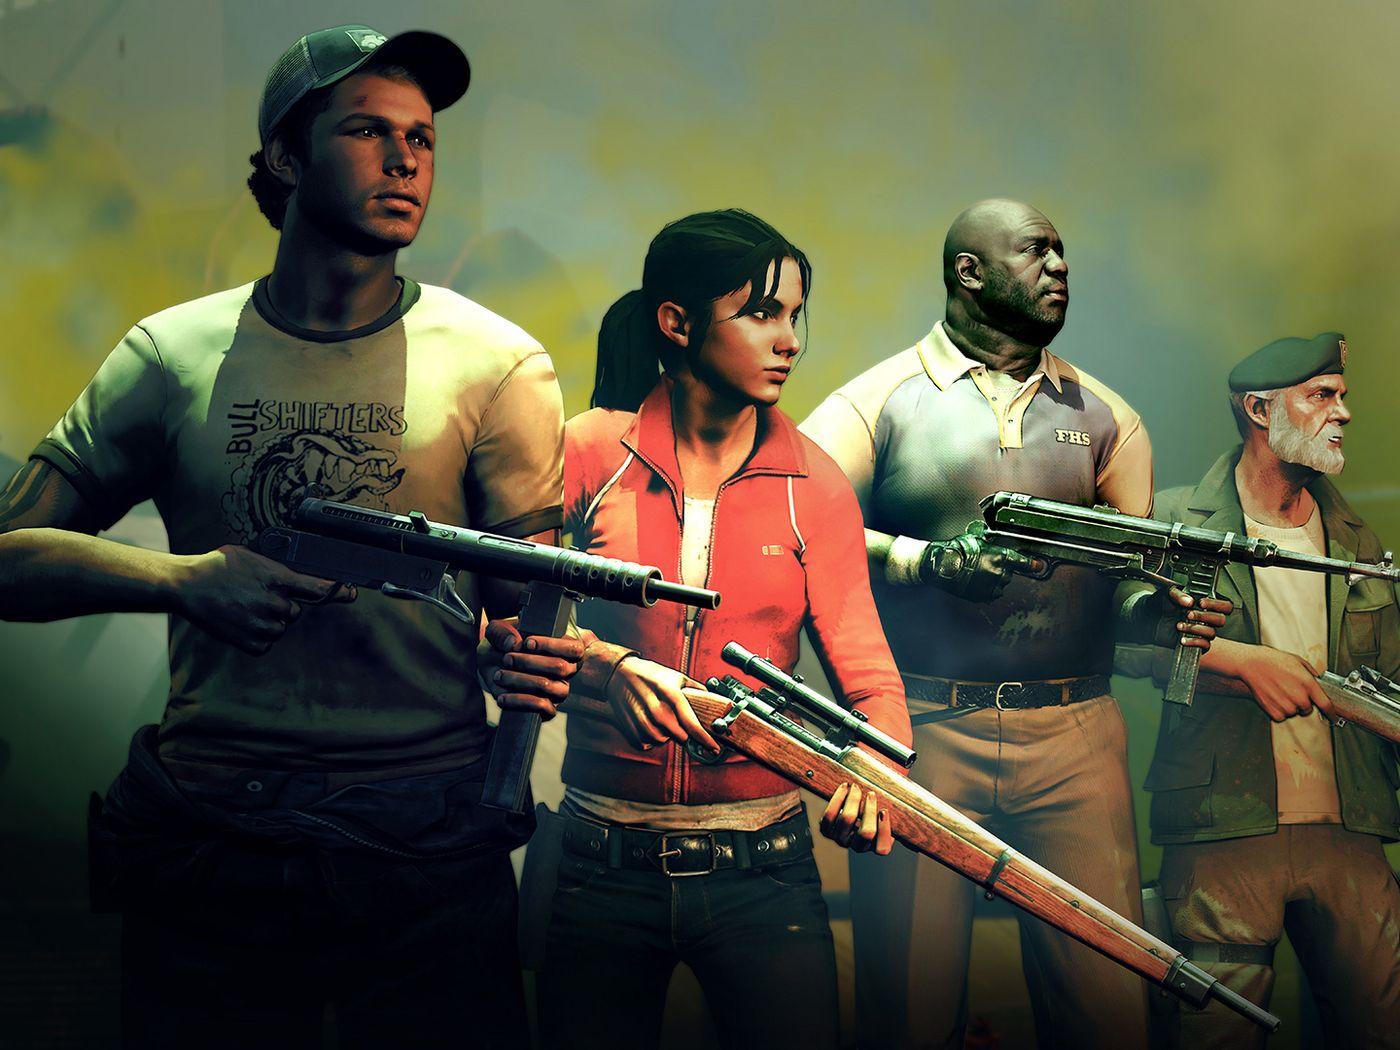 Left 4 Dead survivors added to Zombie Army Trilogy in free PC update